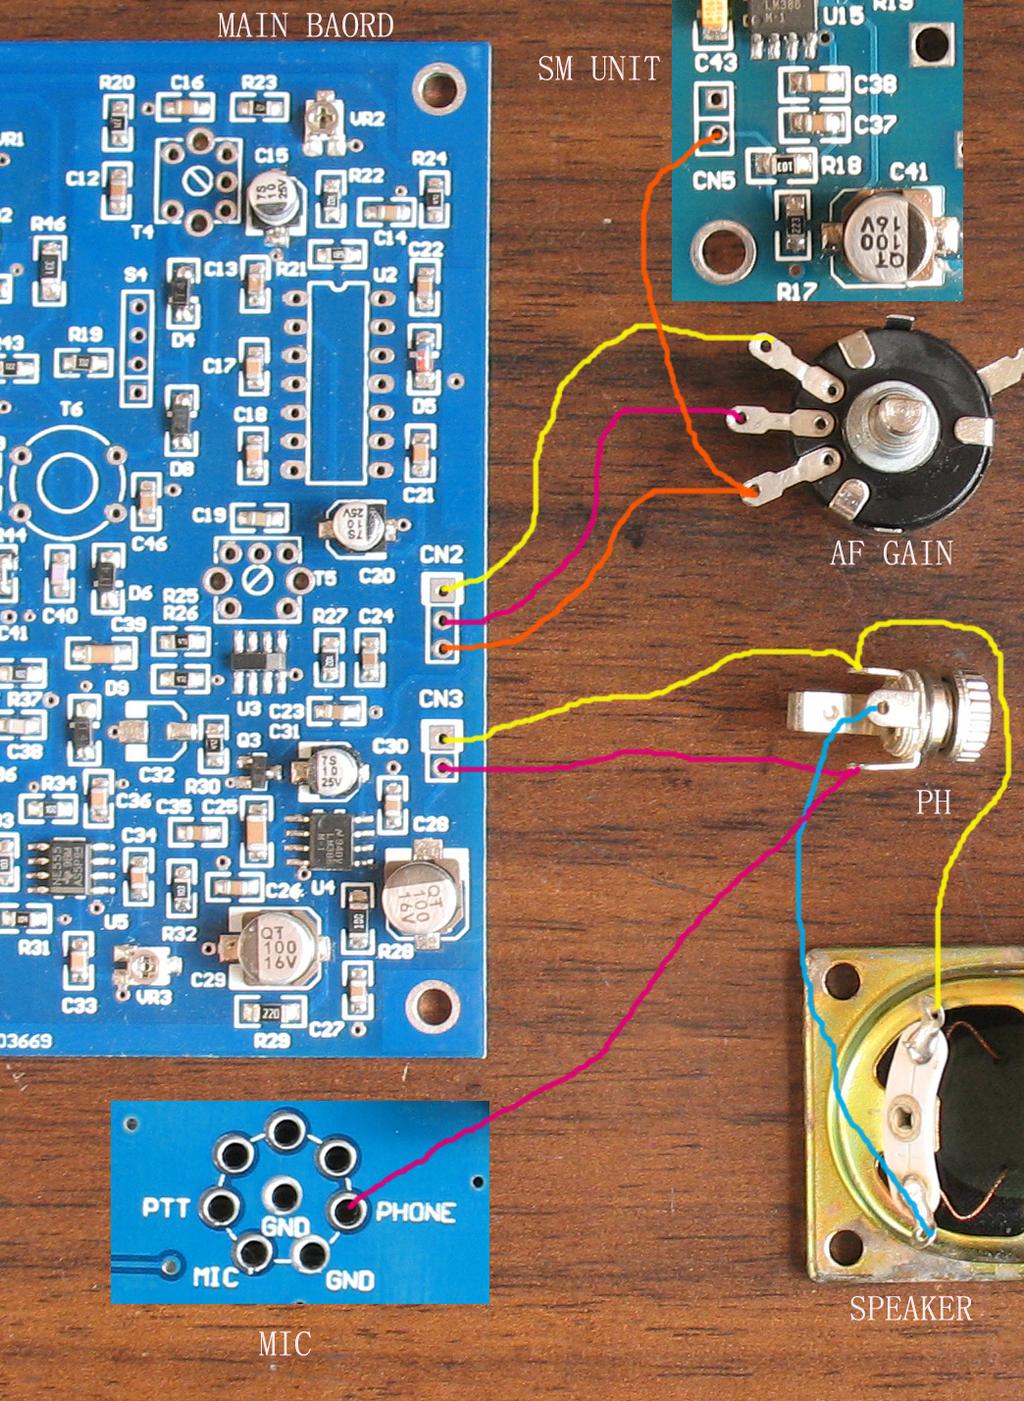 The wiring of the Pro DDS board to the main board is illustrated as the following picture.